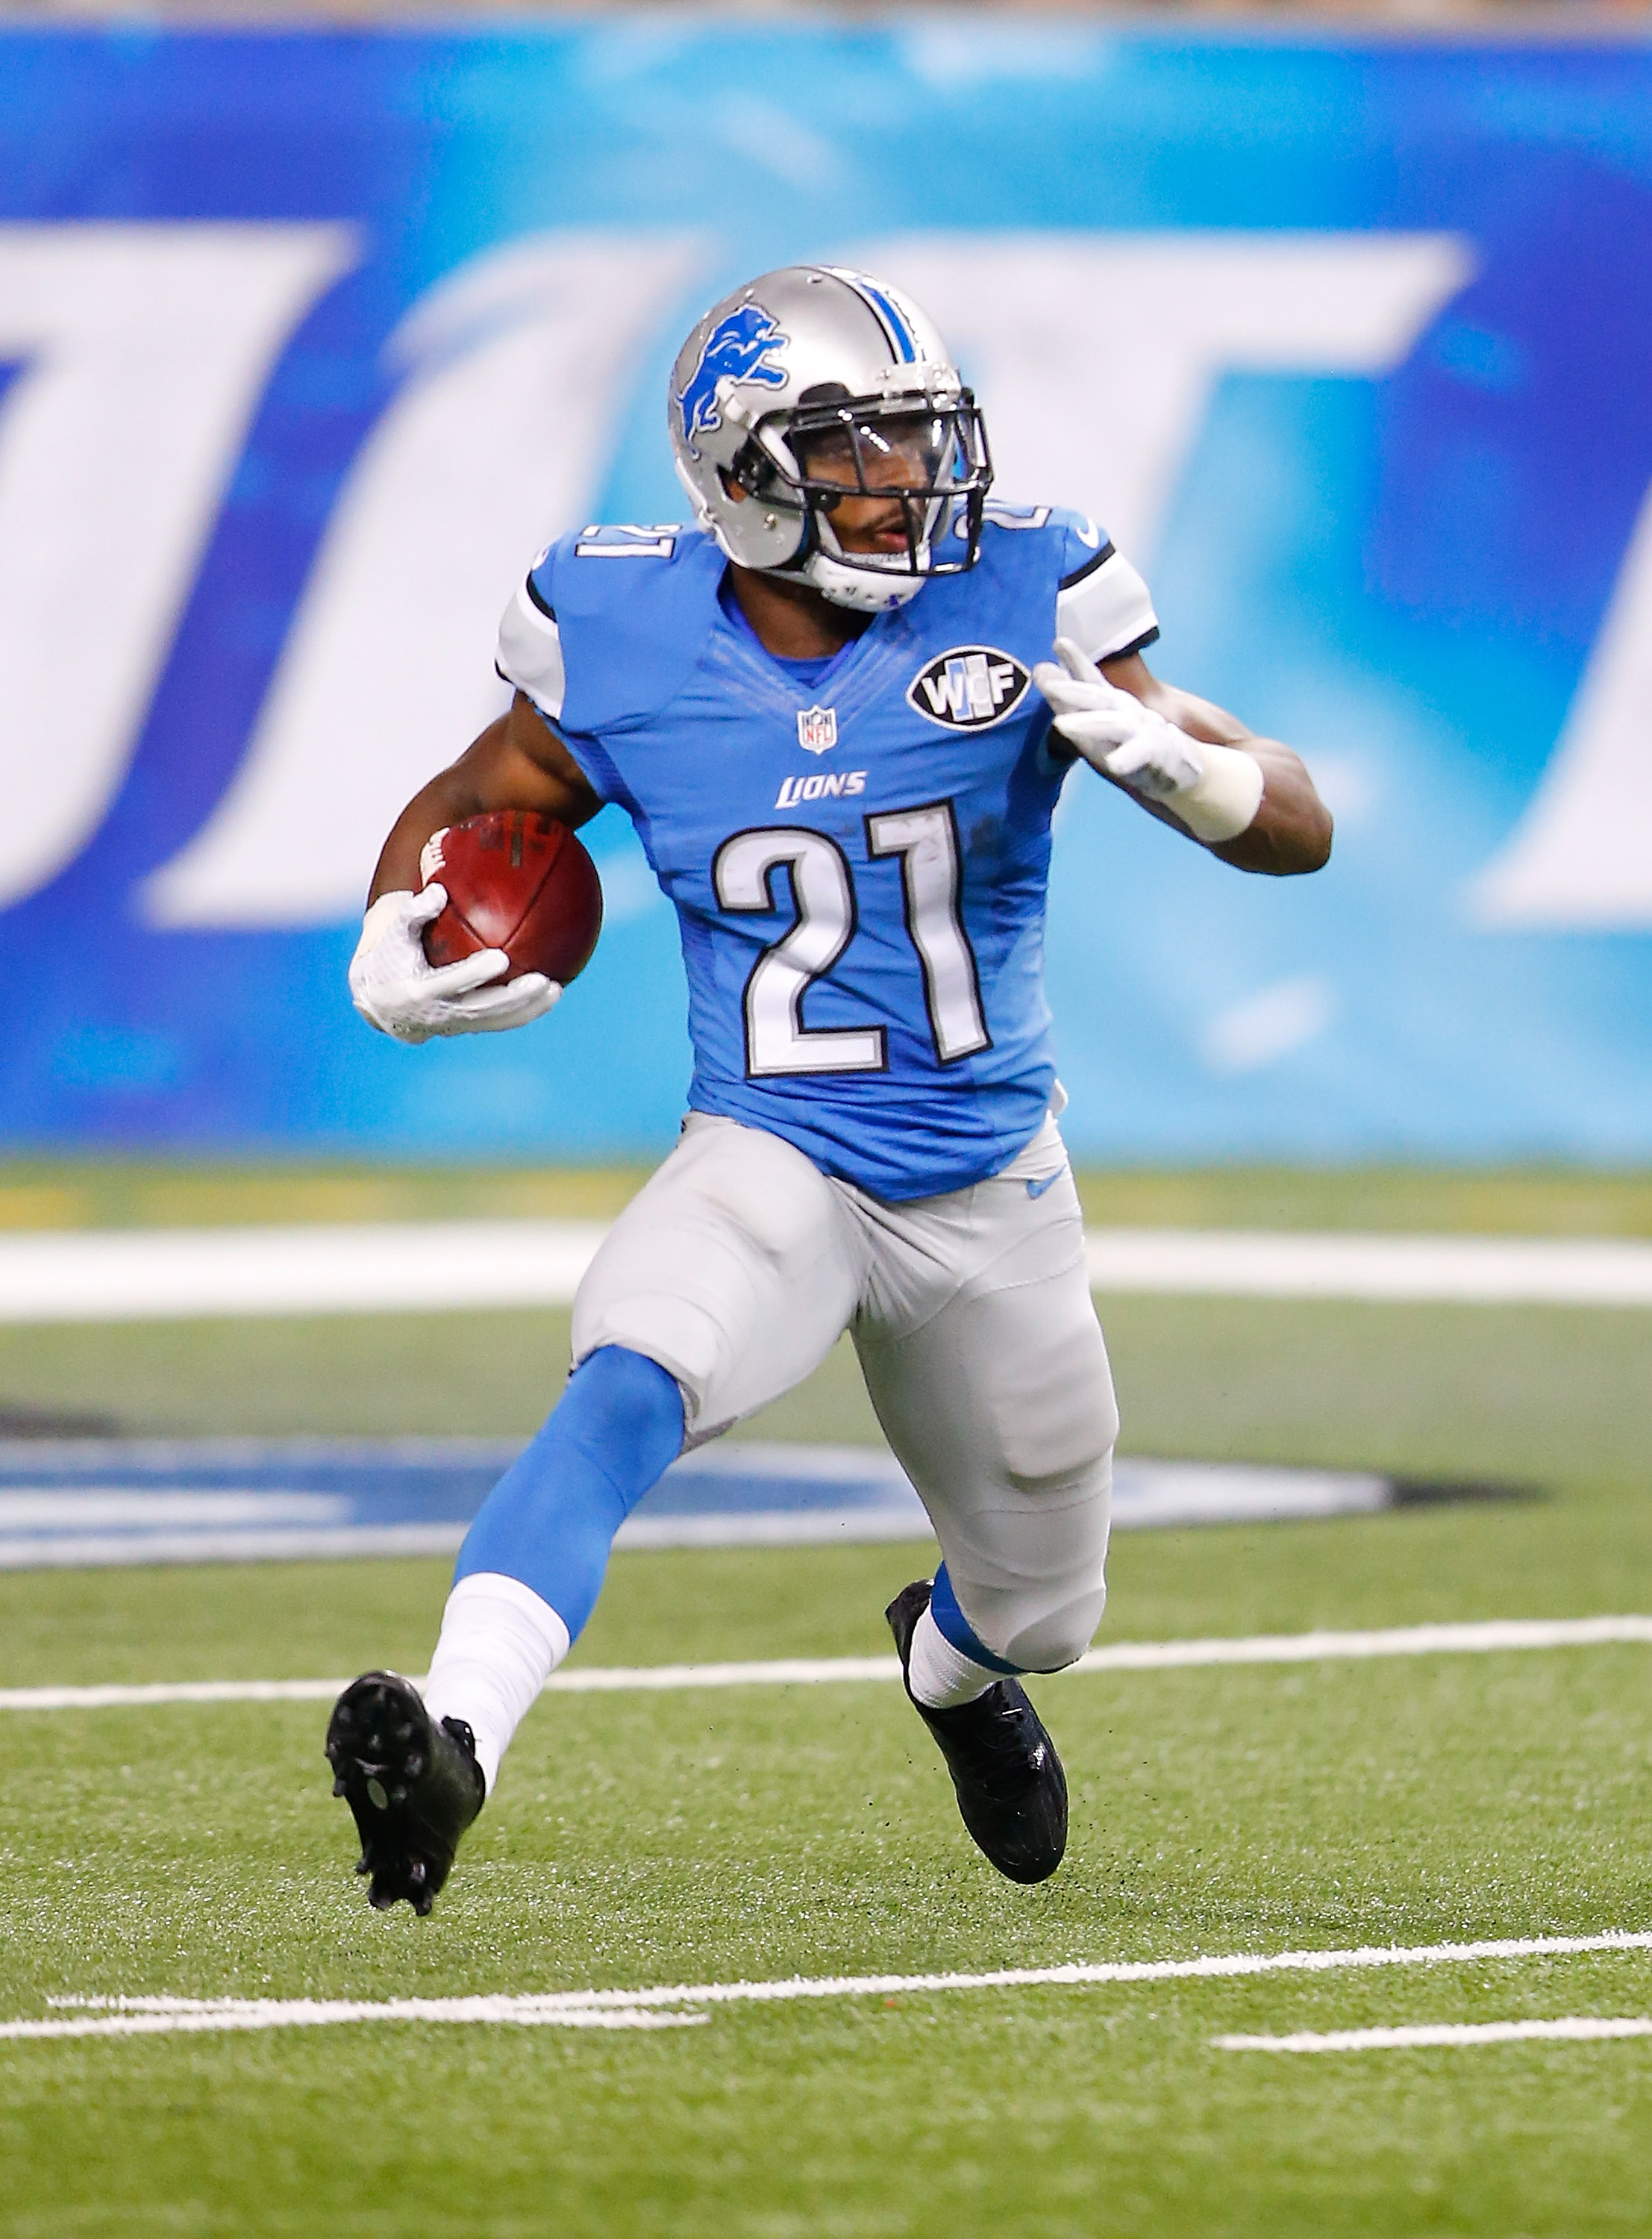 Ameer Abdullah could be a breakout start in the Lions offense (Getty)